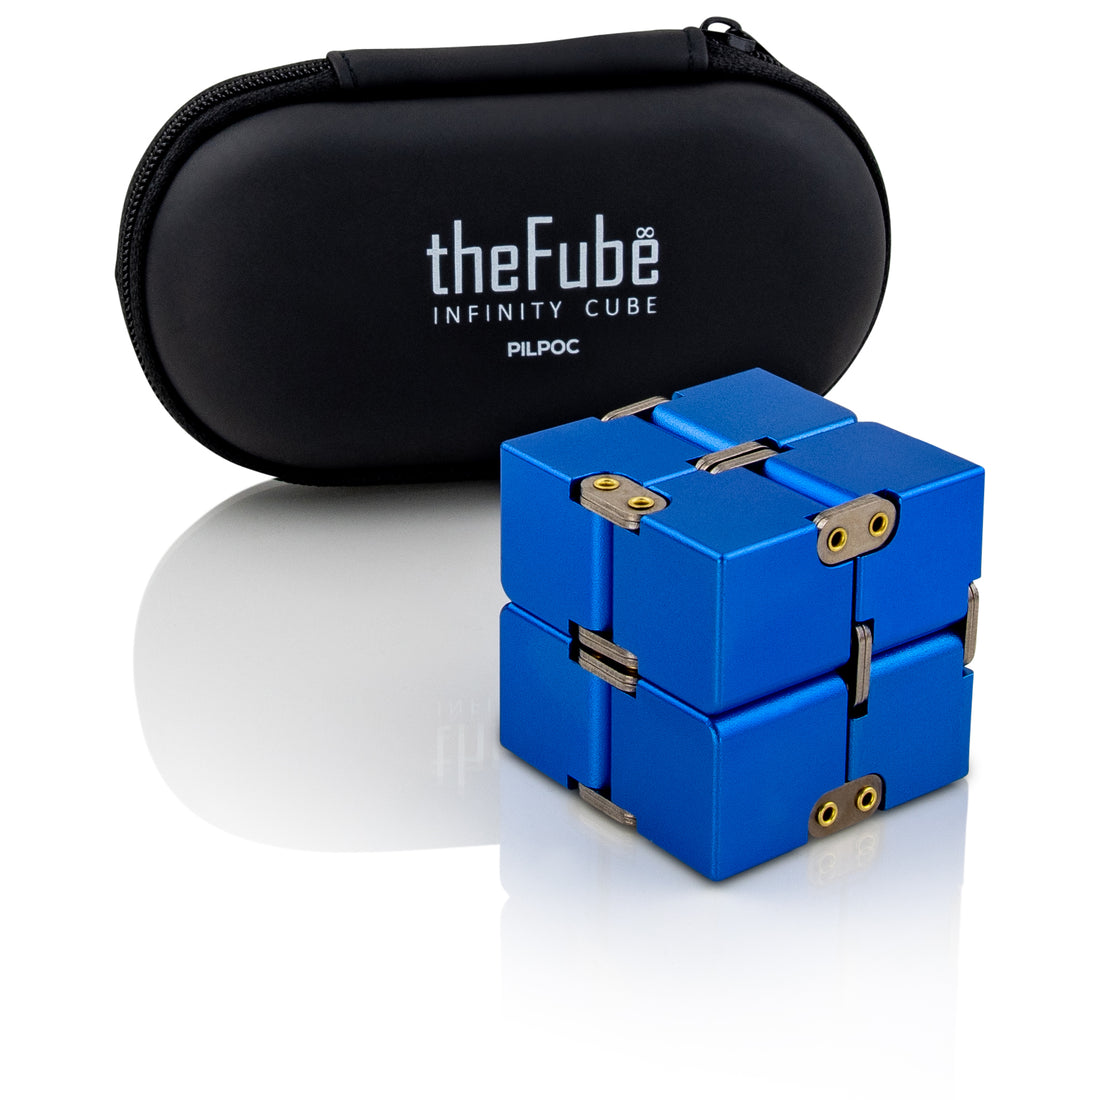 Fidget Cubes and Infinity Cubes: Is It Really Helping To Relieve Stress